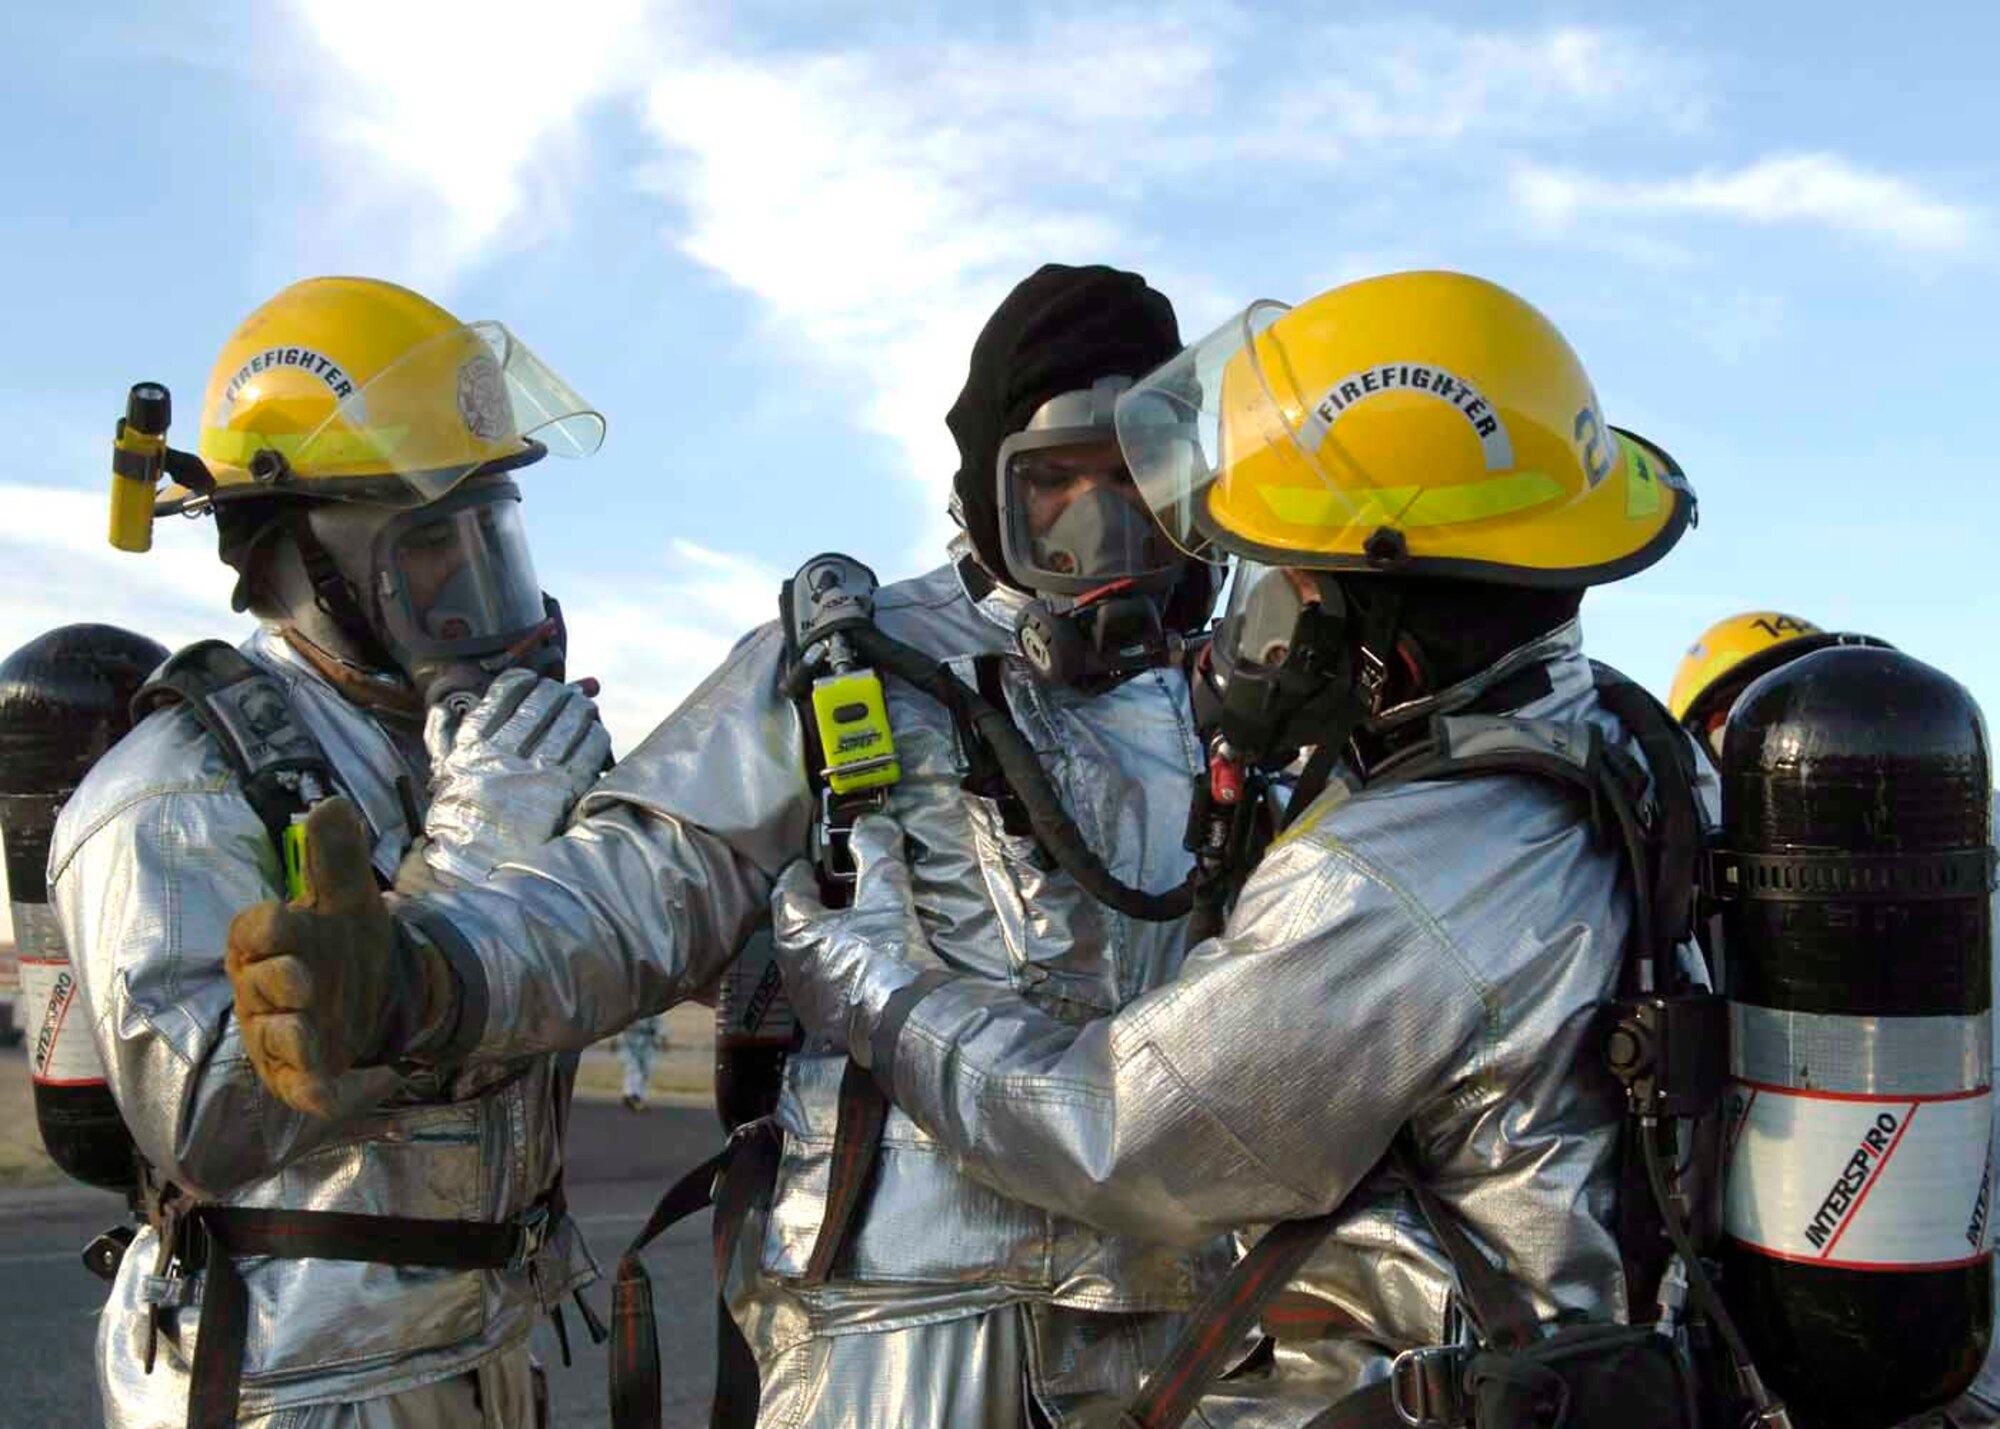 Davis-Monthan Air Force Base firefighters help one another in the decontamination process Dec. 4 at Davis-Monthan AFB, Ariz. Exercise Vigilant Shield 07 is a joint Department of Defense and federal nuclear weapon accident exercise. The exercise scenario involved a C-17 Globemaster III carrying four nuclear weapons to be diverted to Davis-Monthan AFB due to simulated engine failure that caused an aircraft accident. Davis-Monthan firefighters, the Tucson Fire Department, Tucson Police Department, and many different agencies ranging form local to national levels responded to the simulated scene. (U.S. Air Force photo/Senior Airman Christina D. Ponte)